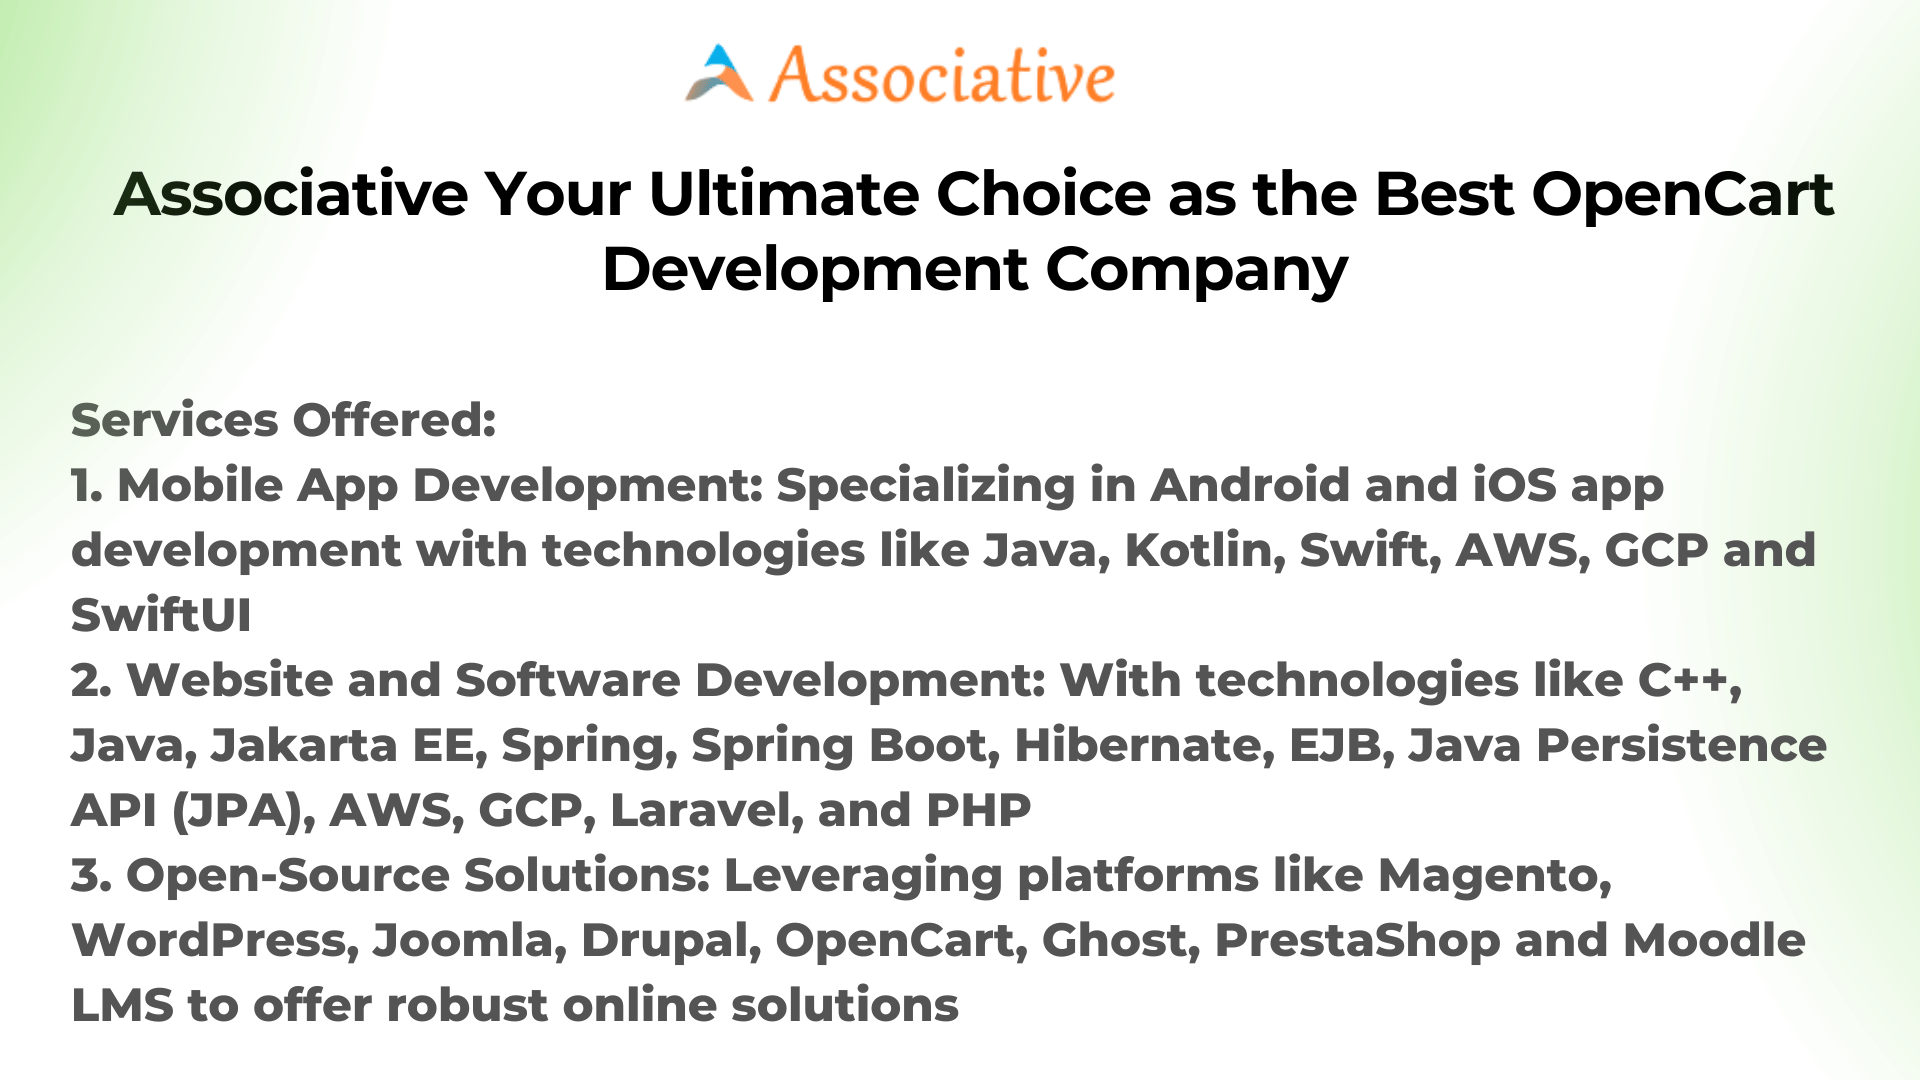 Associative Your Ultimate Choice as the Best OpenCart Development Company